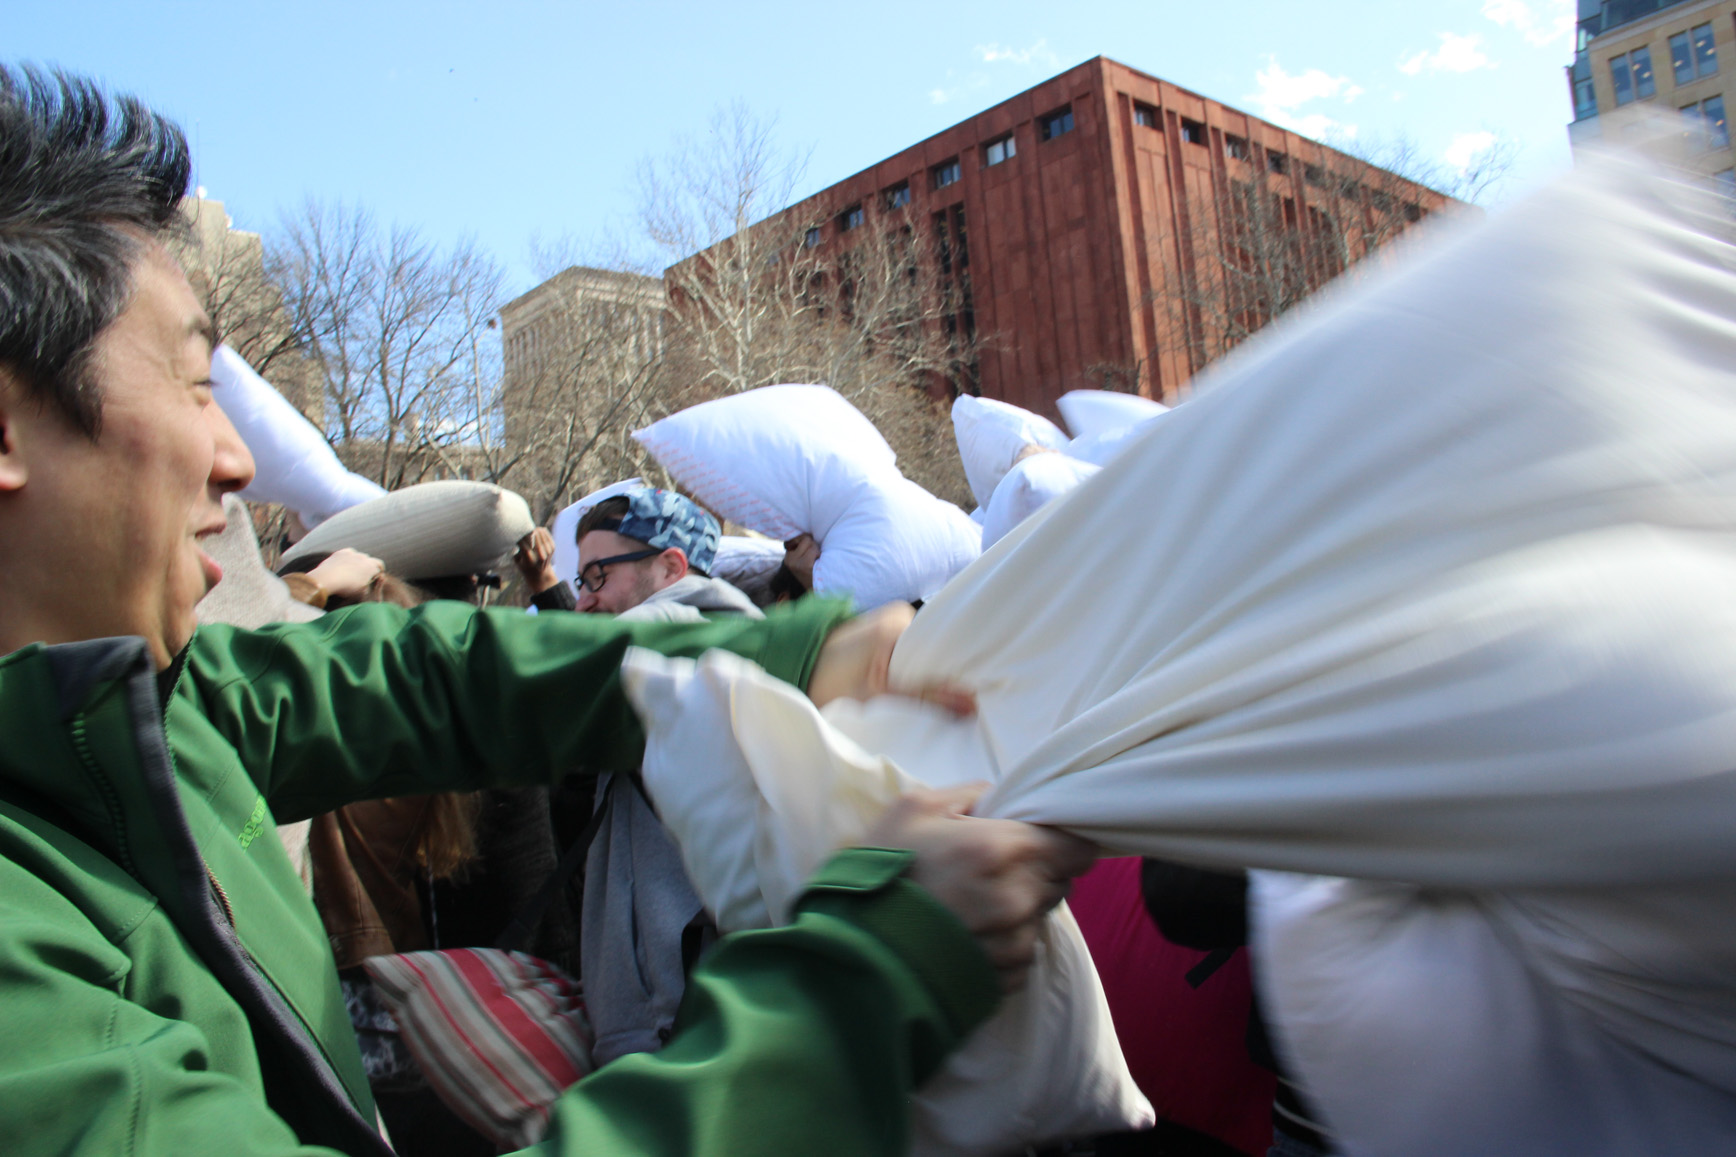 Pillow fighters flailed and whomped away at last year’s melee in Washington Square Park.  File photo by Tequila Minsky